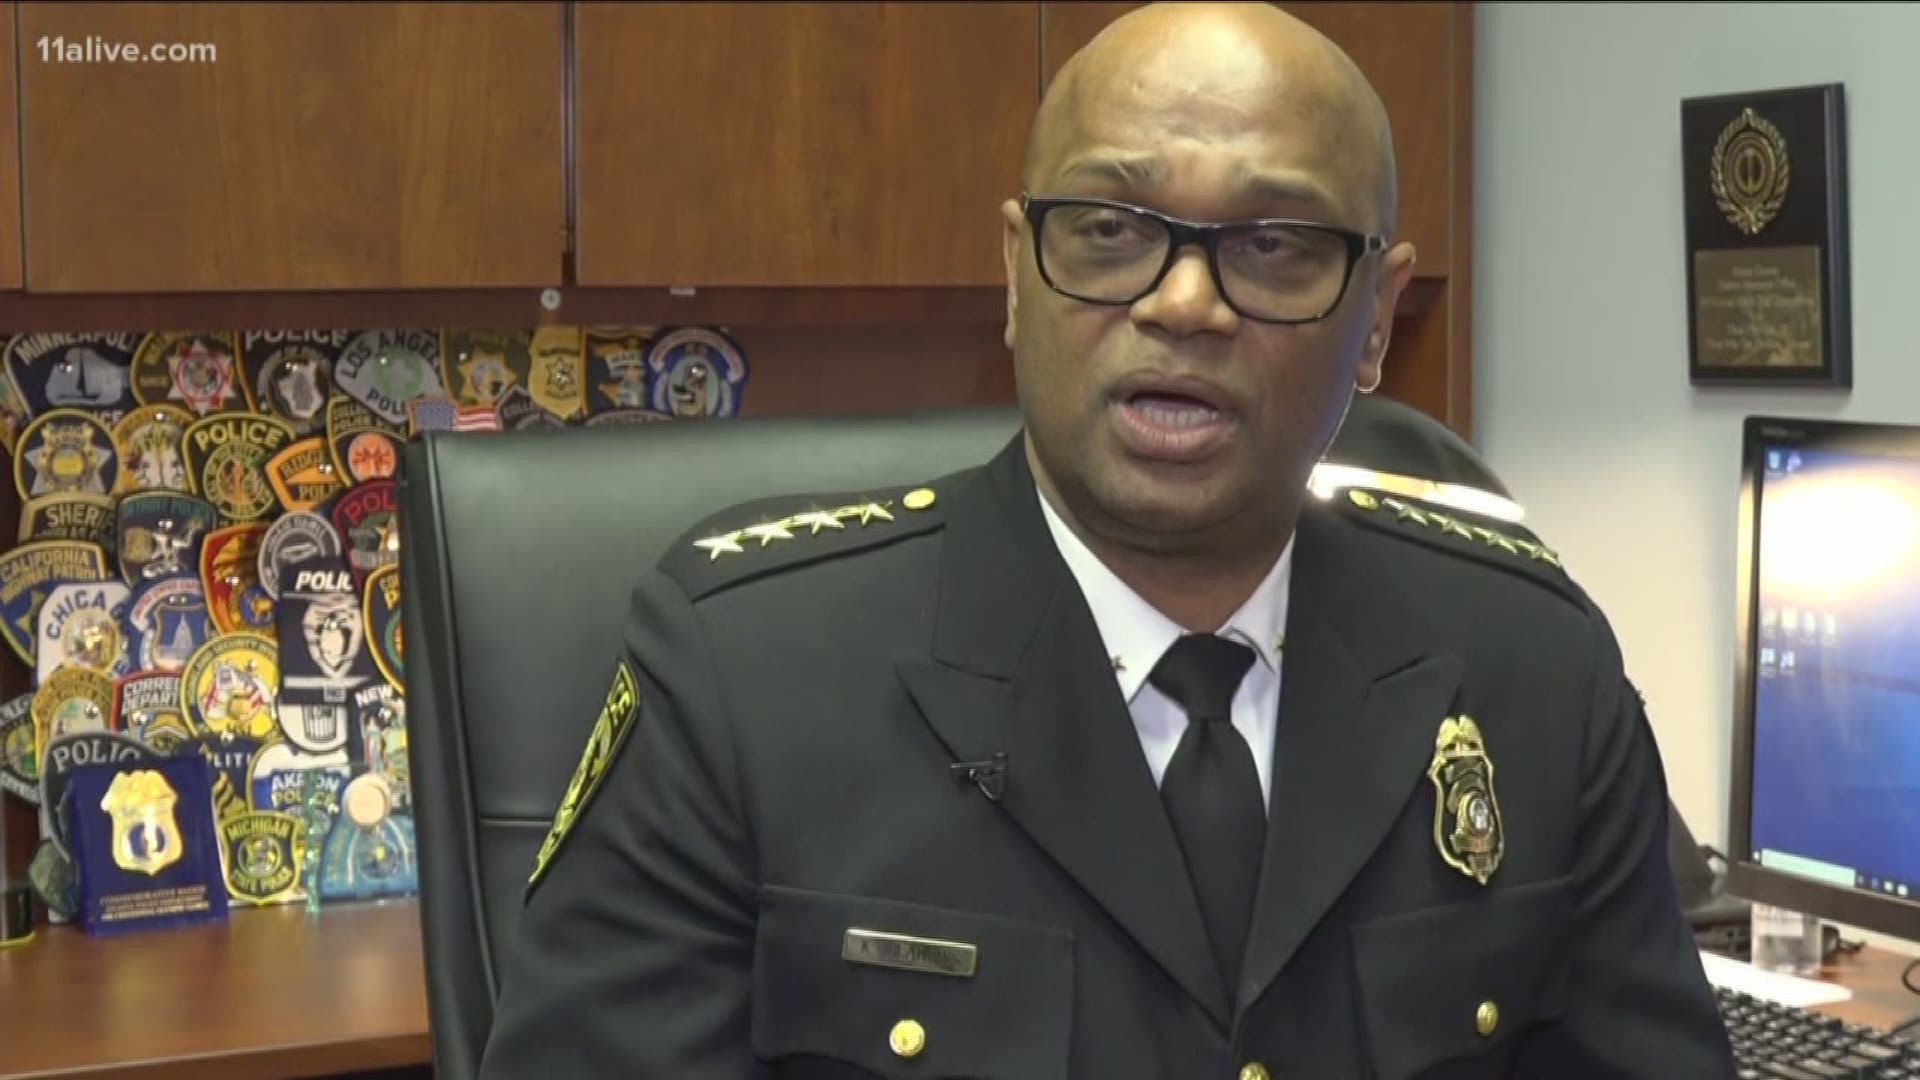 South Fulton's new police chief already had changes in place for the city's pursuit policy, but they weren't approved until after a fiery crash that killed three people.